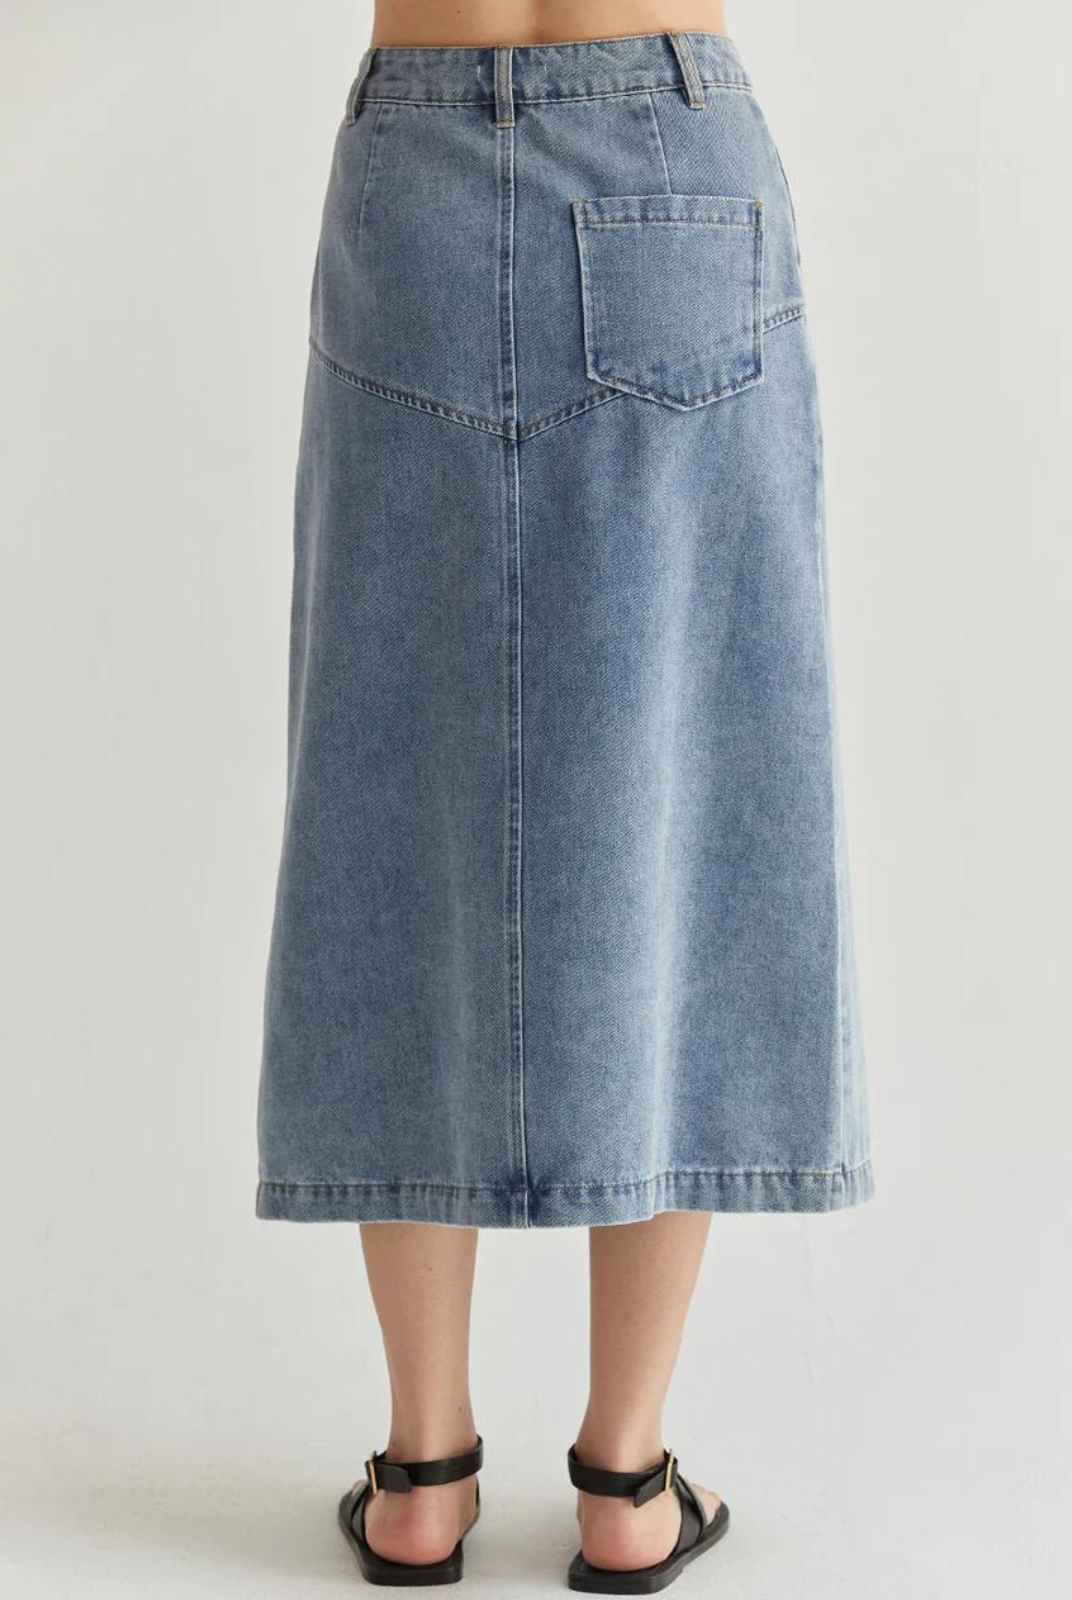 Brielle Denim Midi Skirt.The Brielle Denim Midi Skirt features a front button and zipper closure, side pockets, rear patch pocket, and angled seam on front hips that meets the inverted pleat detail.